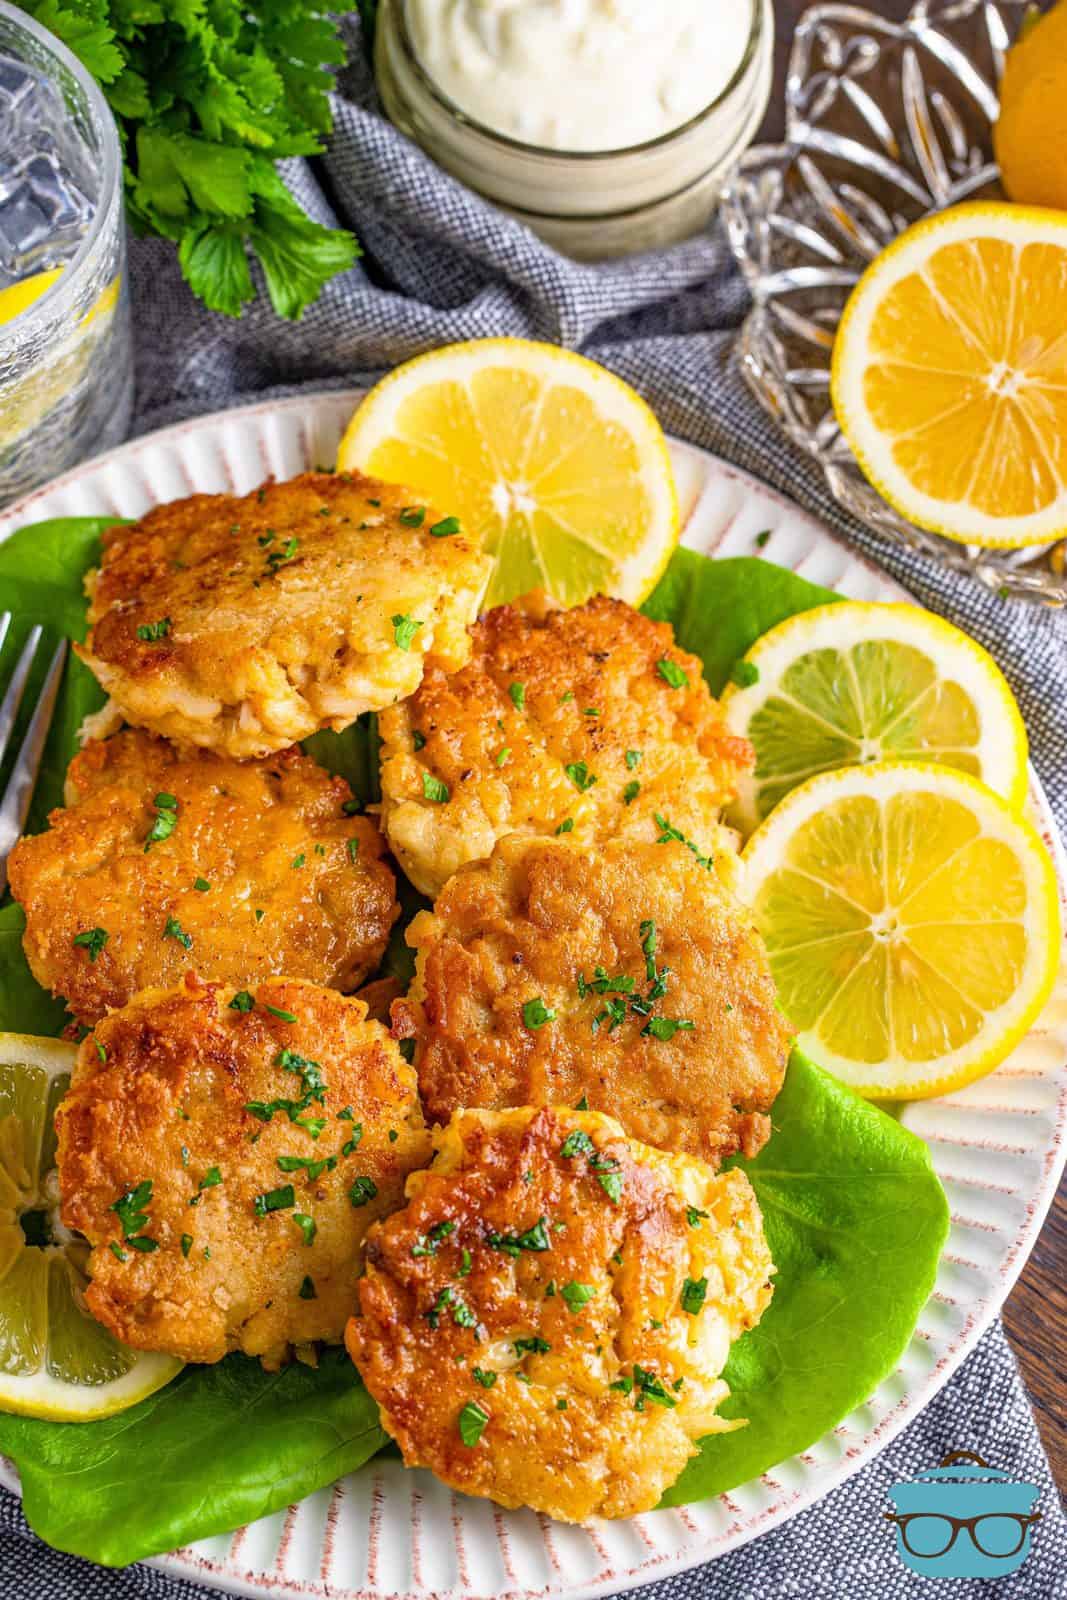 Overhead of stacked Southern Crab Cakes on plate with lettuce and lemon slices.